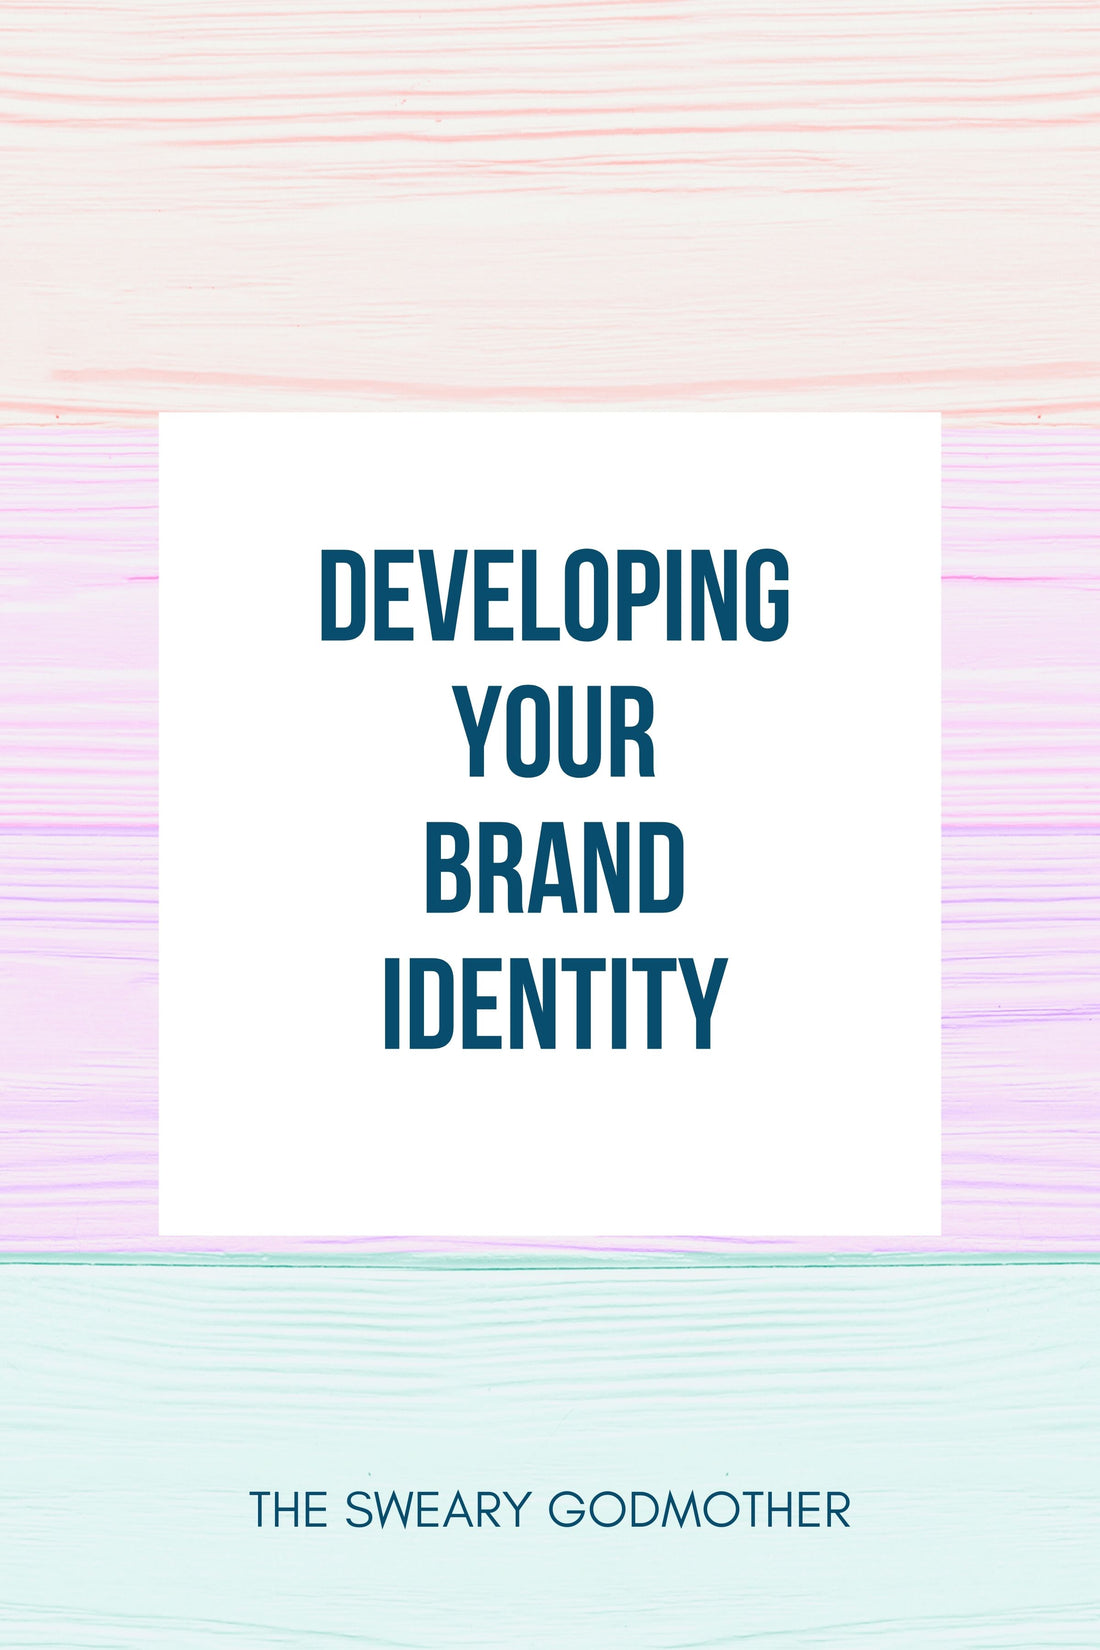 How To Develop Your Brand Identity